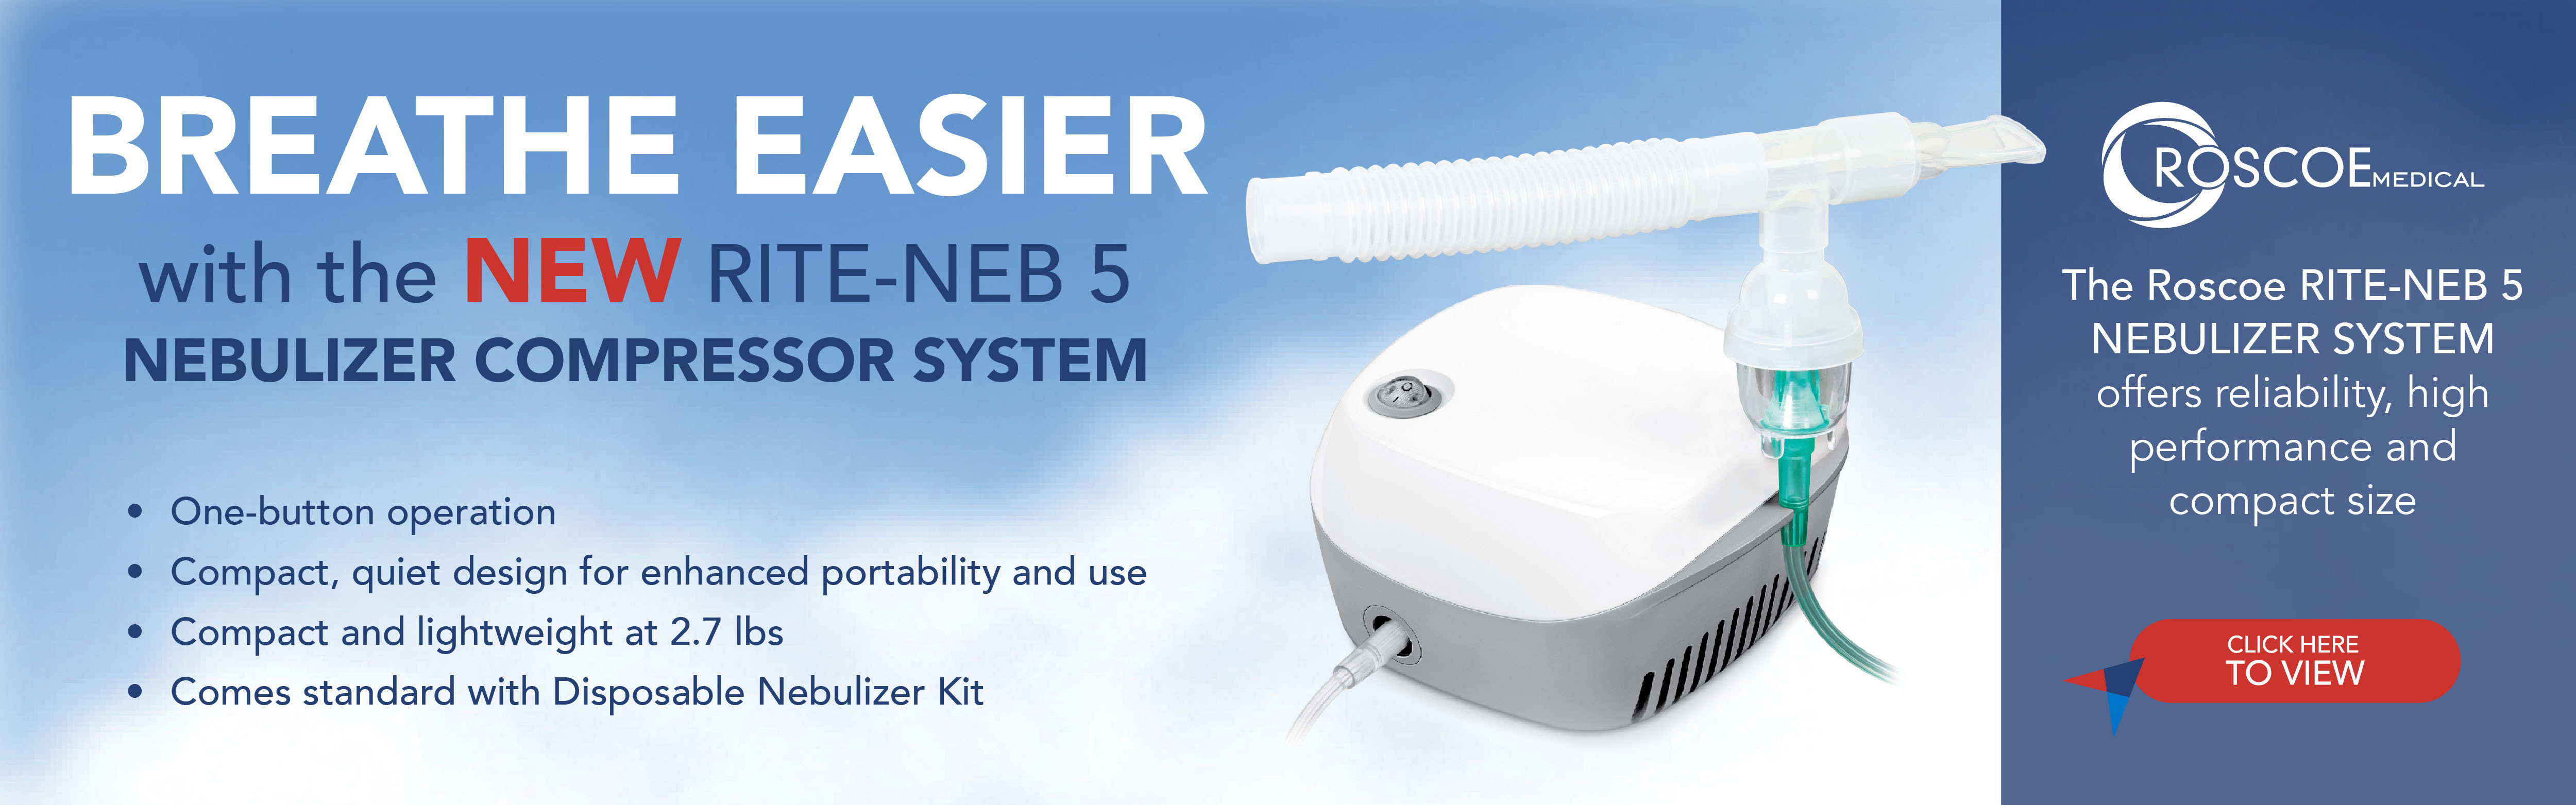 A nebulizer compressor system next to text, "Breathe Easier with the New Rite-Neb 5"